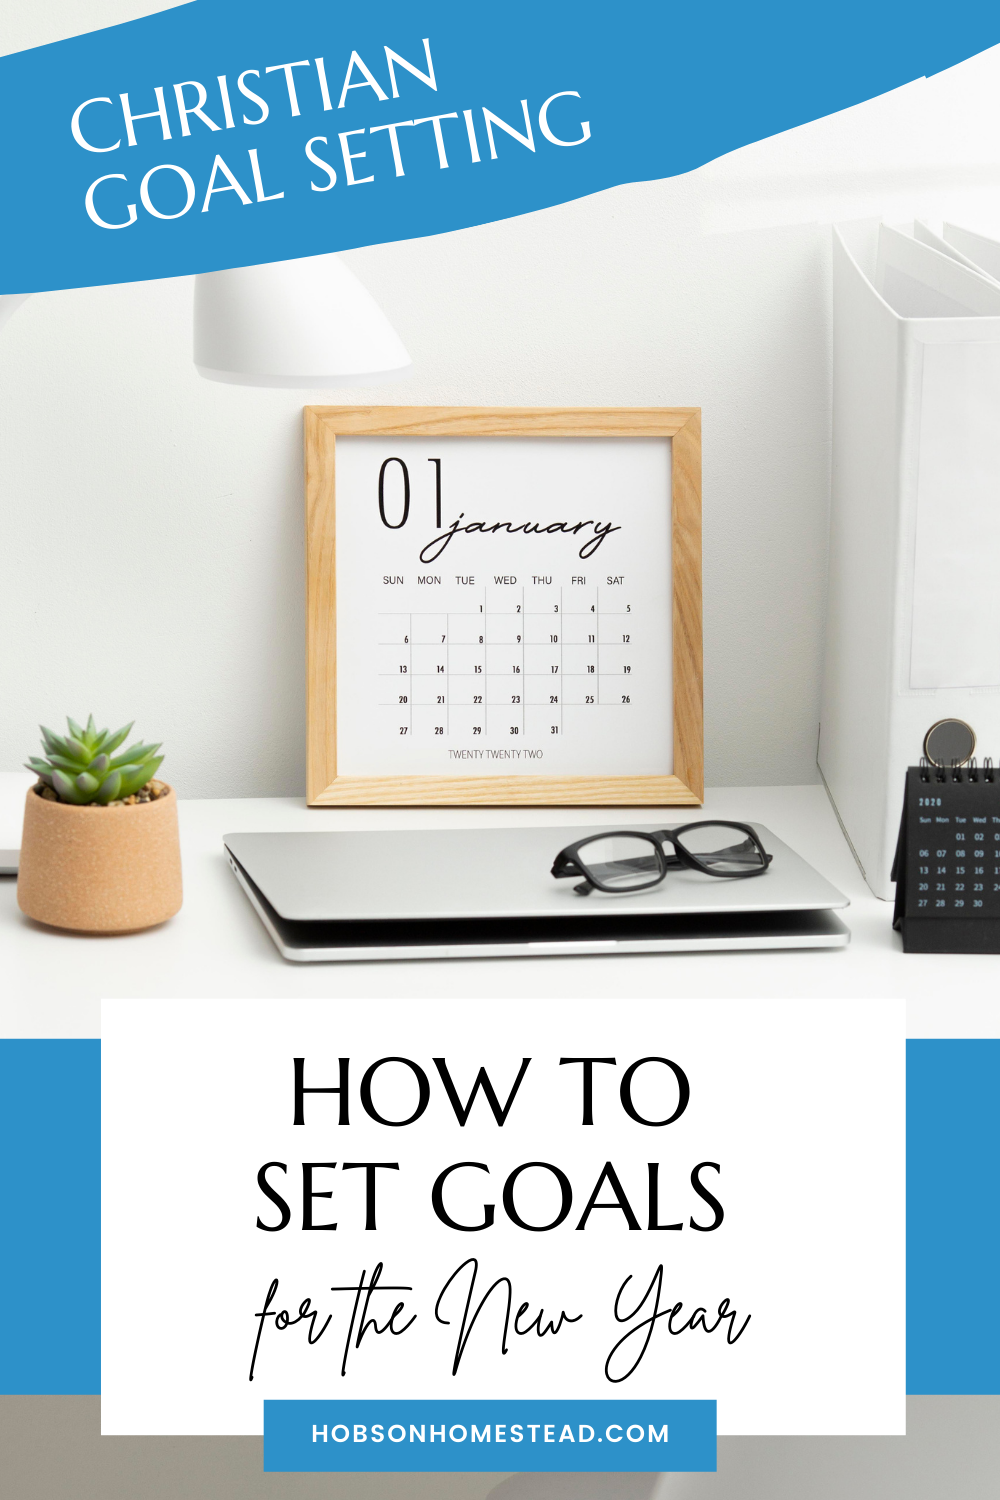 Christian Goal Setting: How to Set Goals for the New Year

Find out everything you need to know about Christian goal setting for the New Year—from praying to prioritizing your yearly goals.